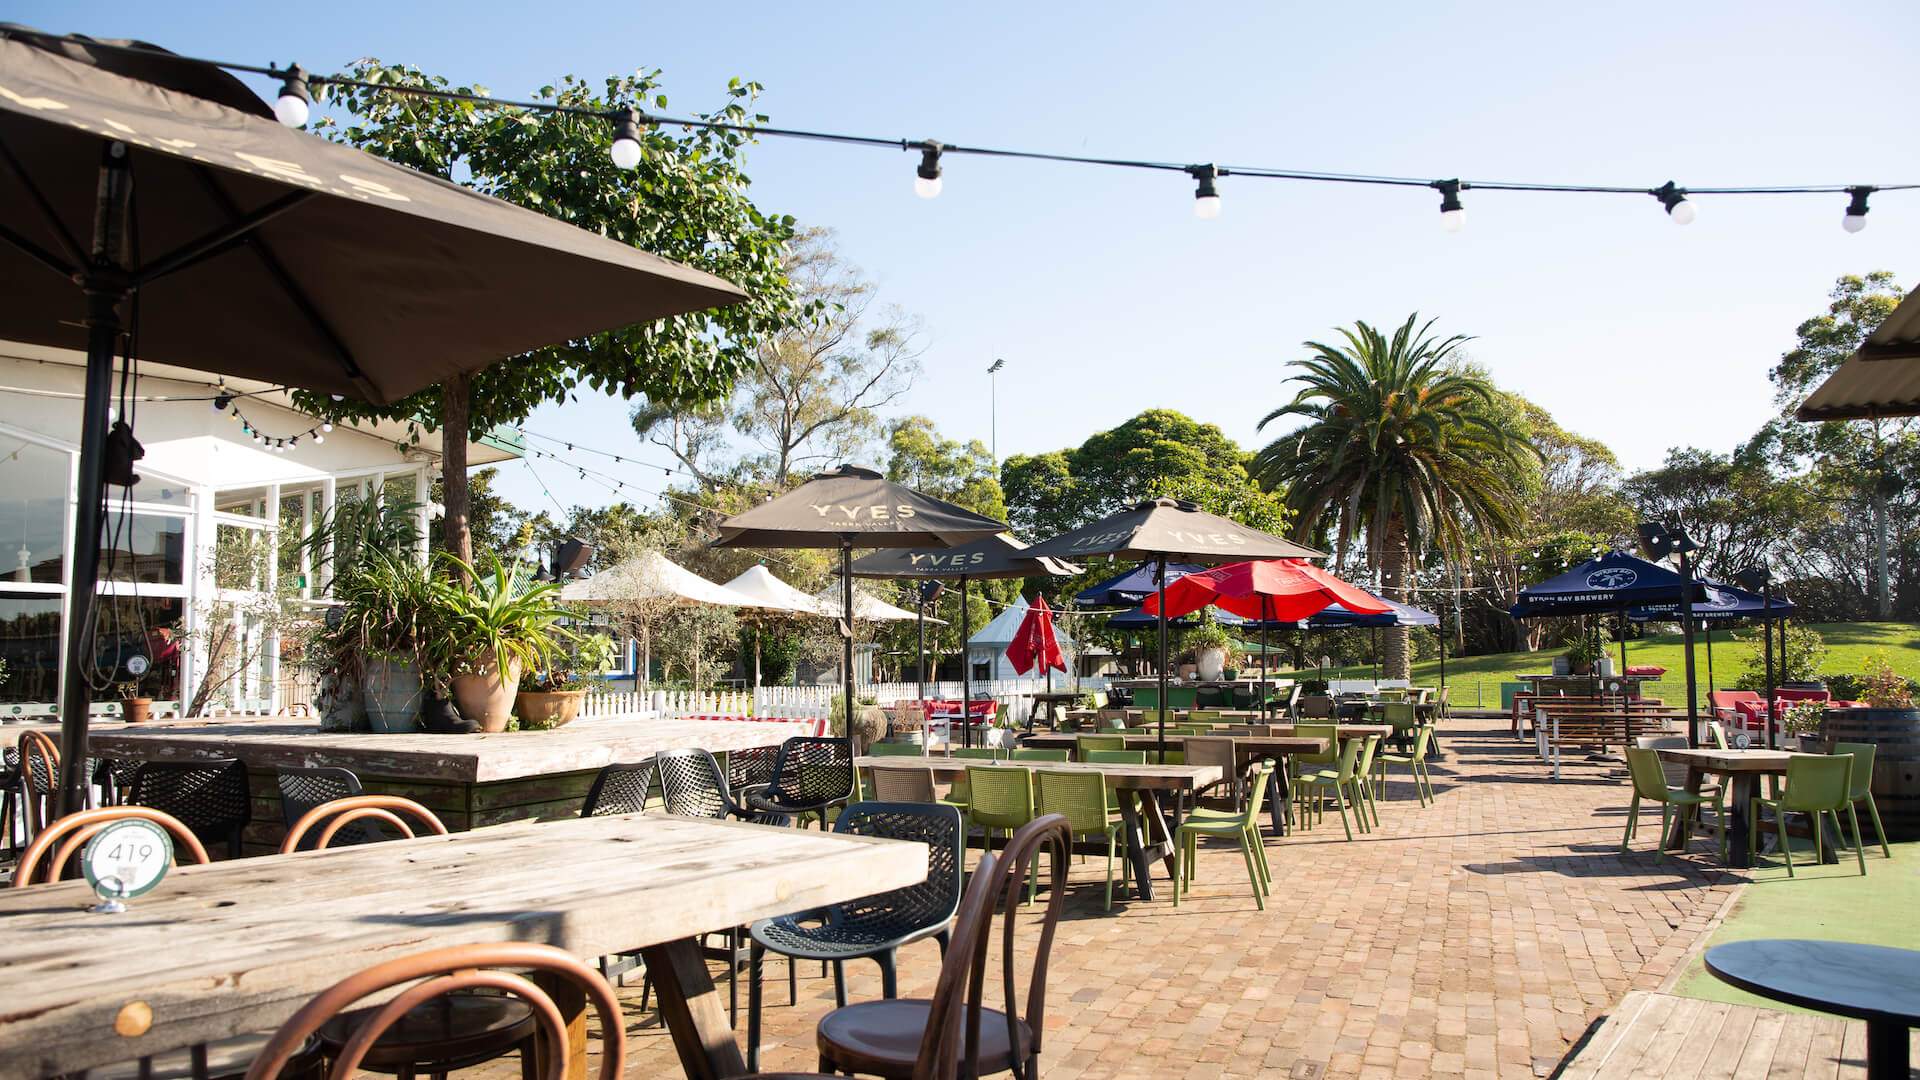 The beer garden at The greens - one of the best pubs in Sydney.